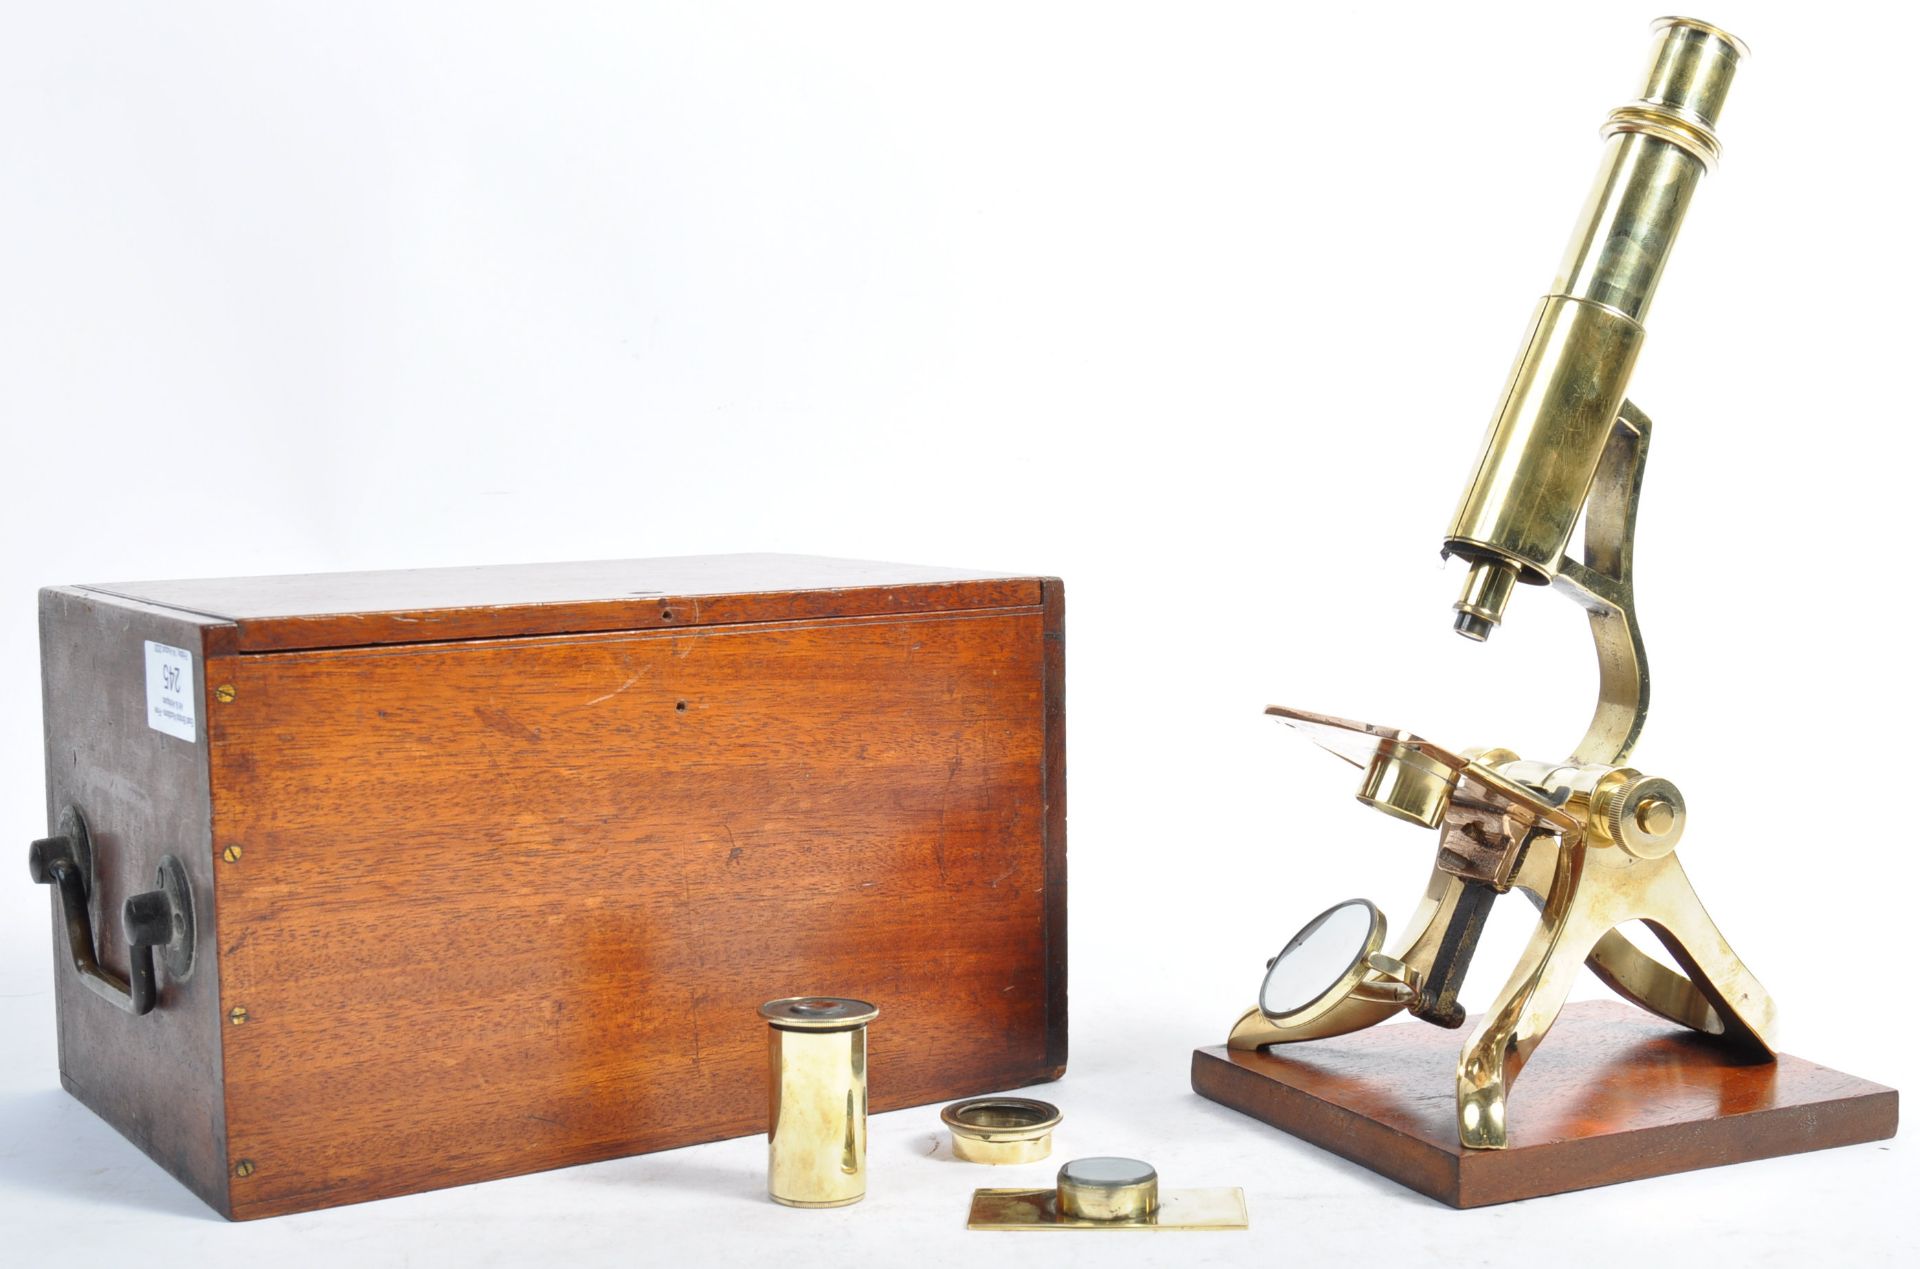 HENRY CROUCH OF LONDON POLISHED BRASS MICROSCOPE